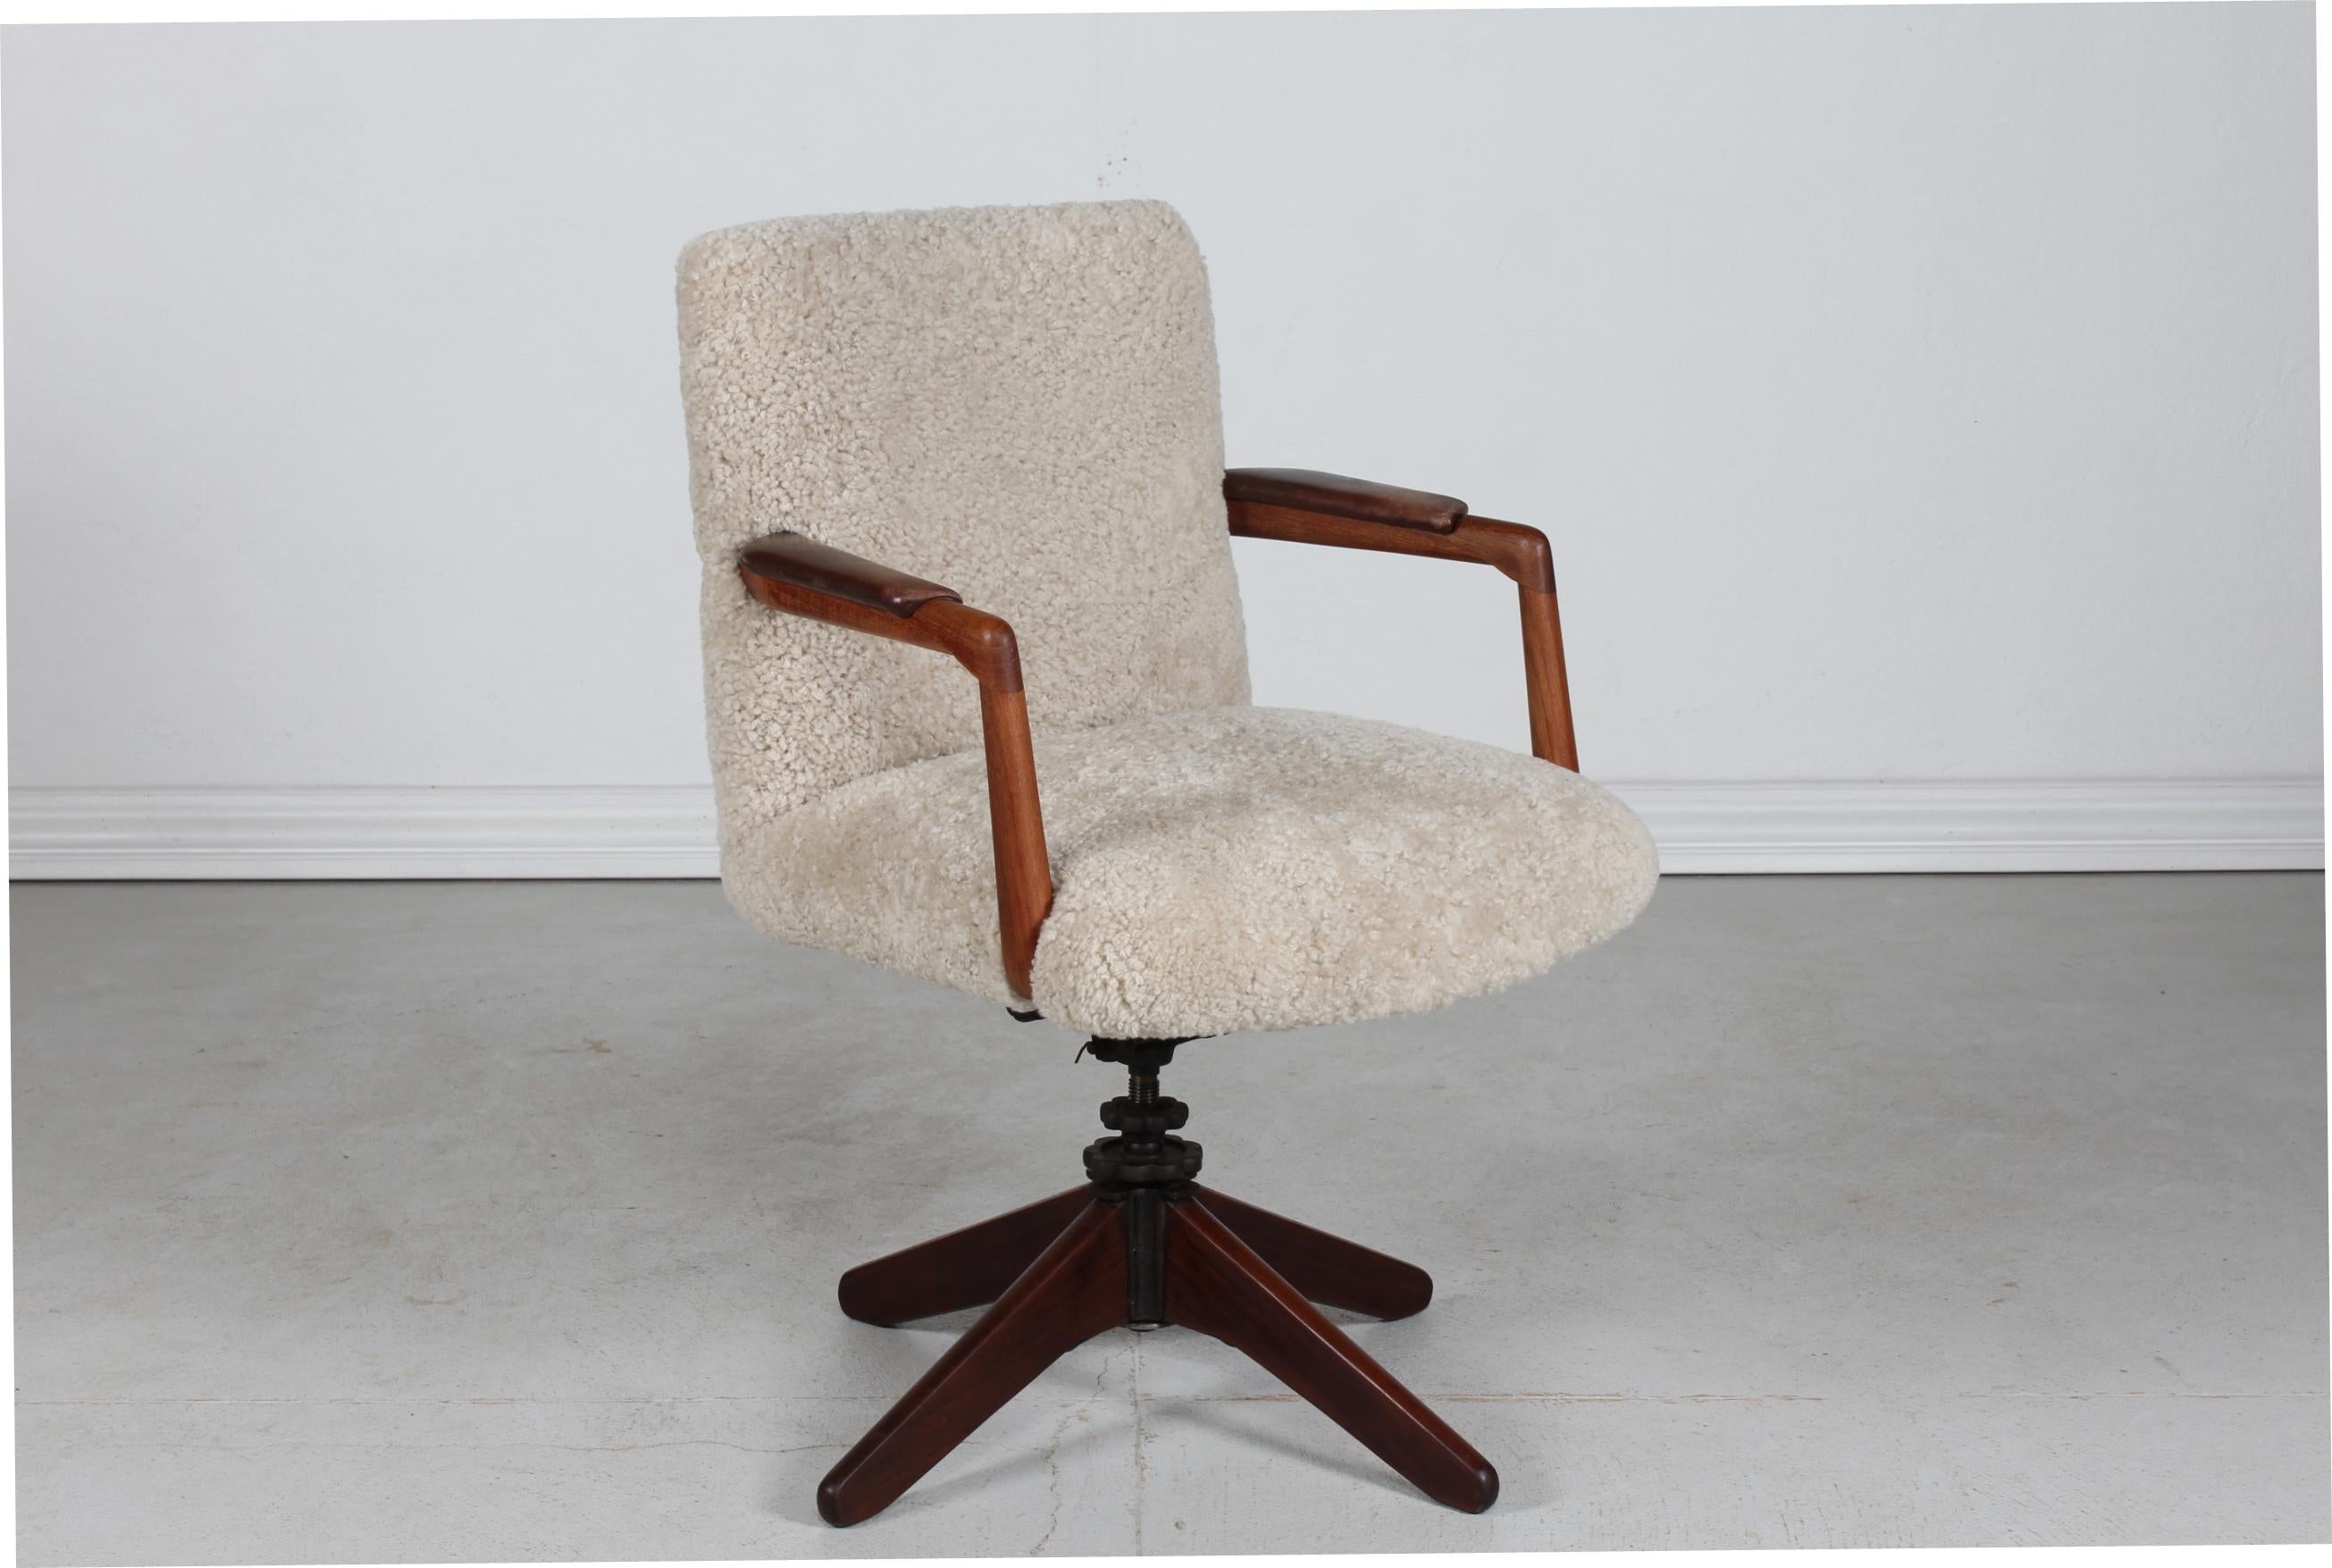 Hans J. Wegner style Vintage Danish swivel chair/office chair.
The teak armrests are upholstred with the original leather. 
The seat and backrest are reupholstered with new sheepskin. 

It is possible to adjust the angle of the seat - The Sheriff